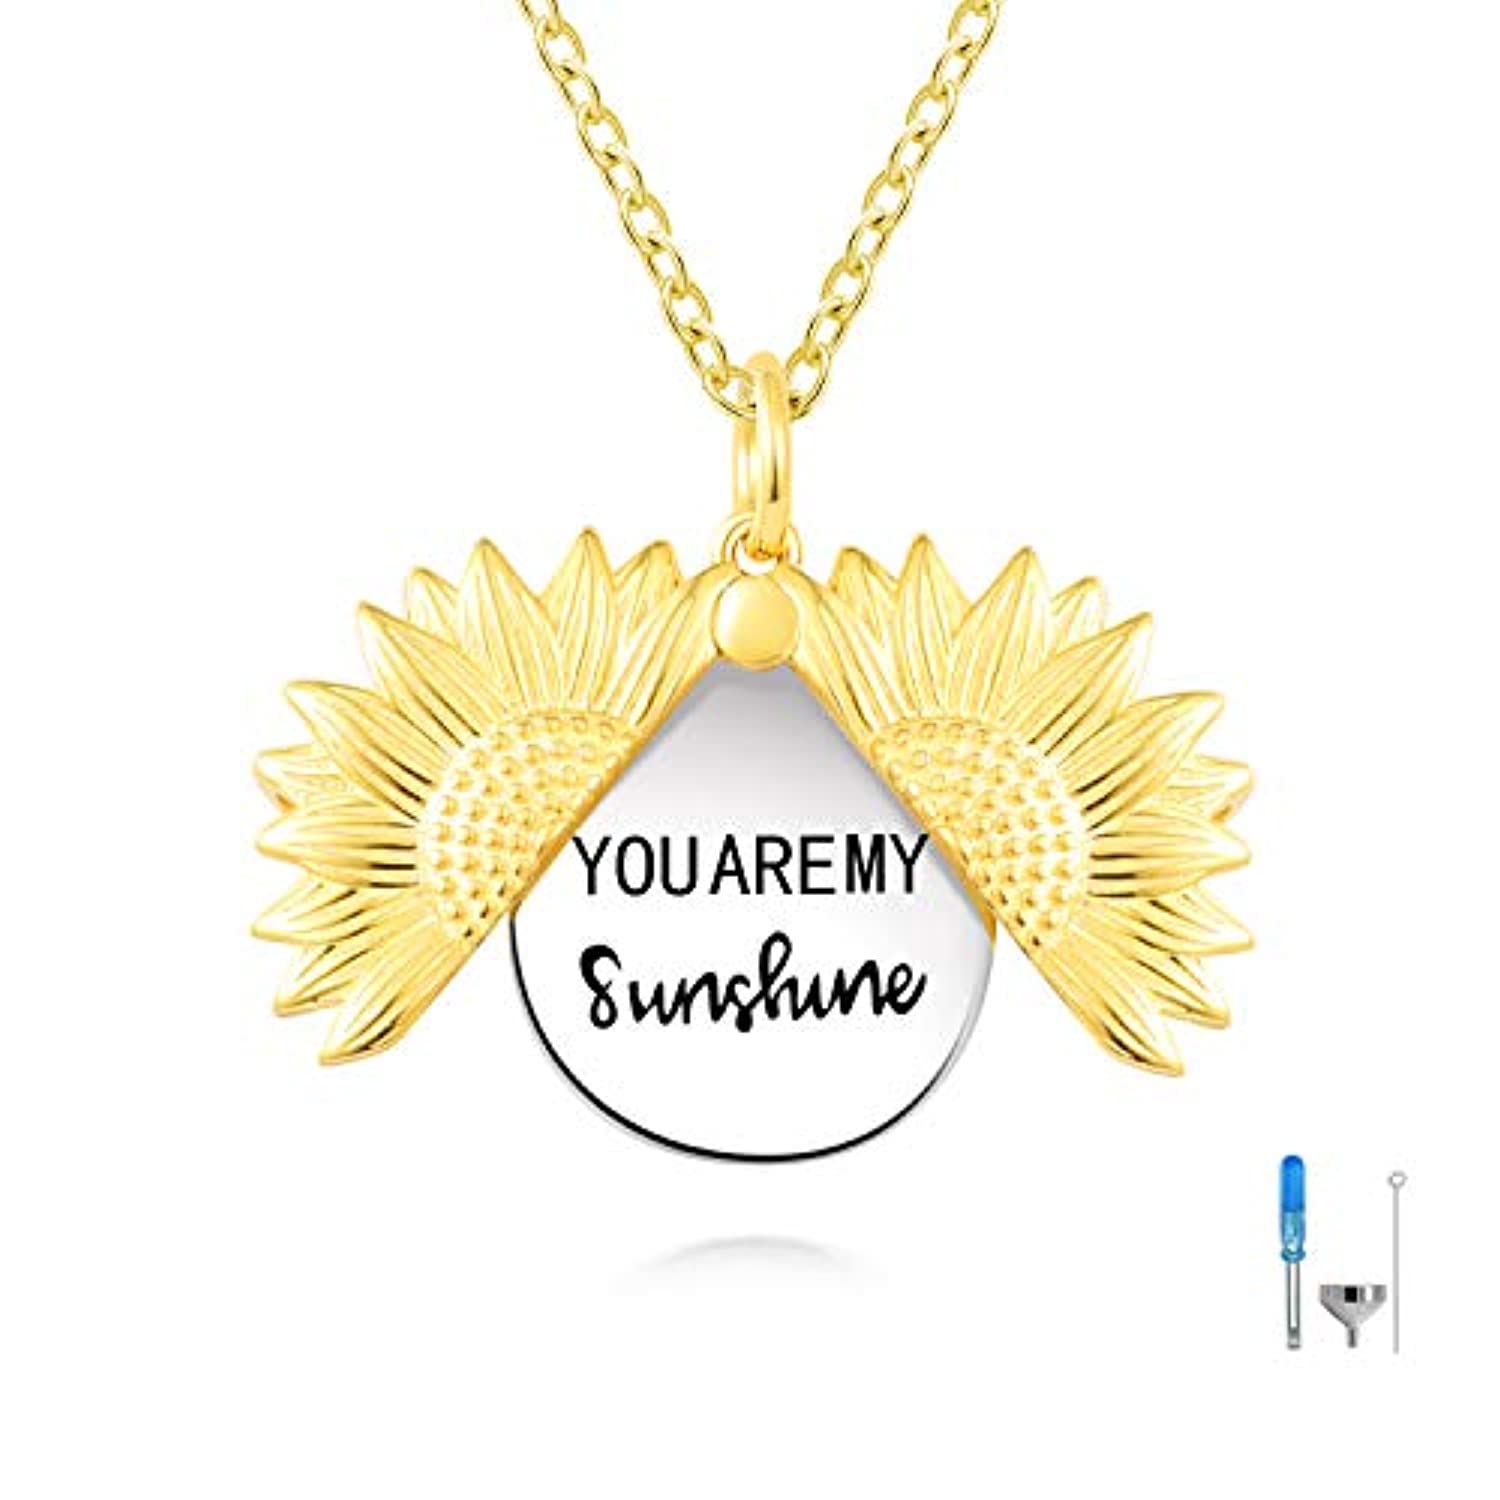 Sunflower Necklace - You are my Sunshine – Chic and Bling